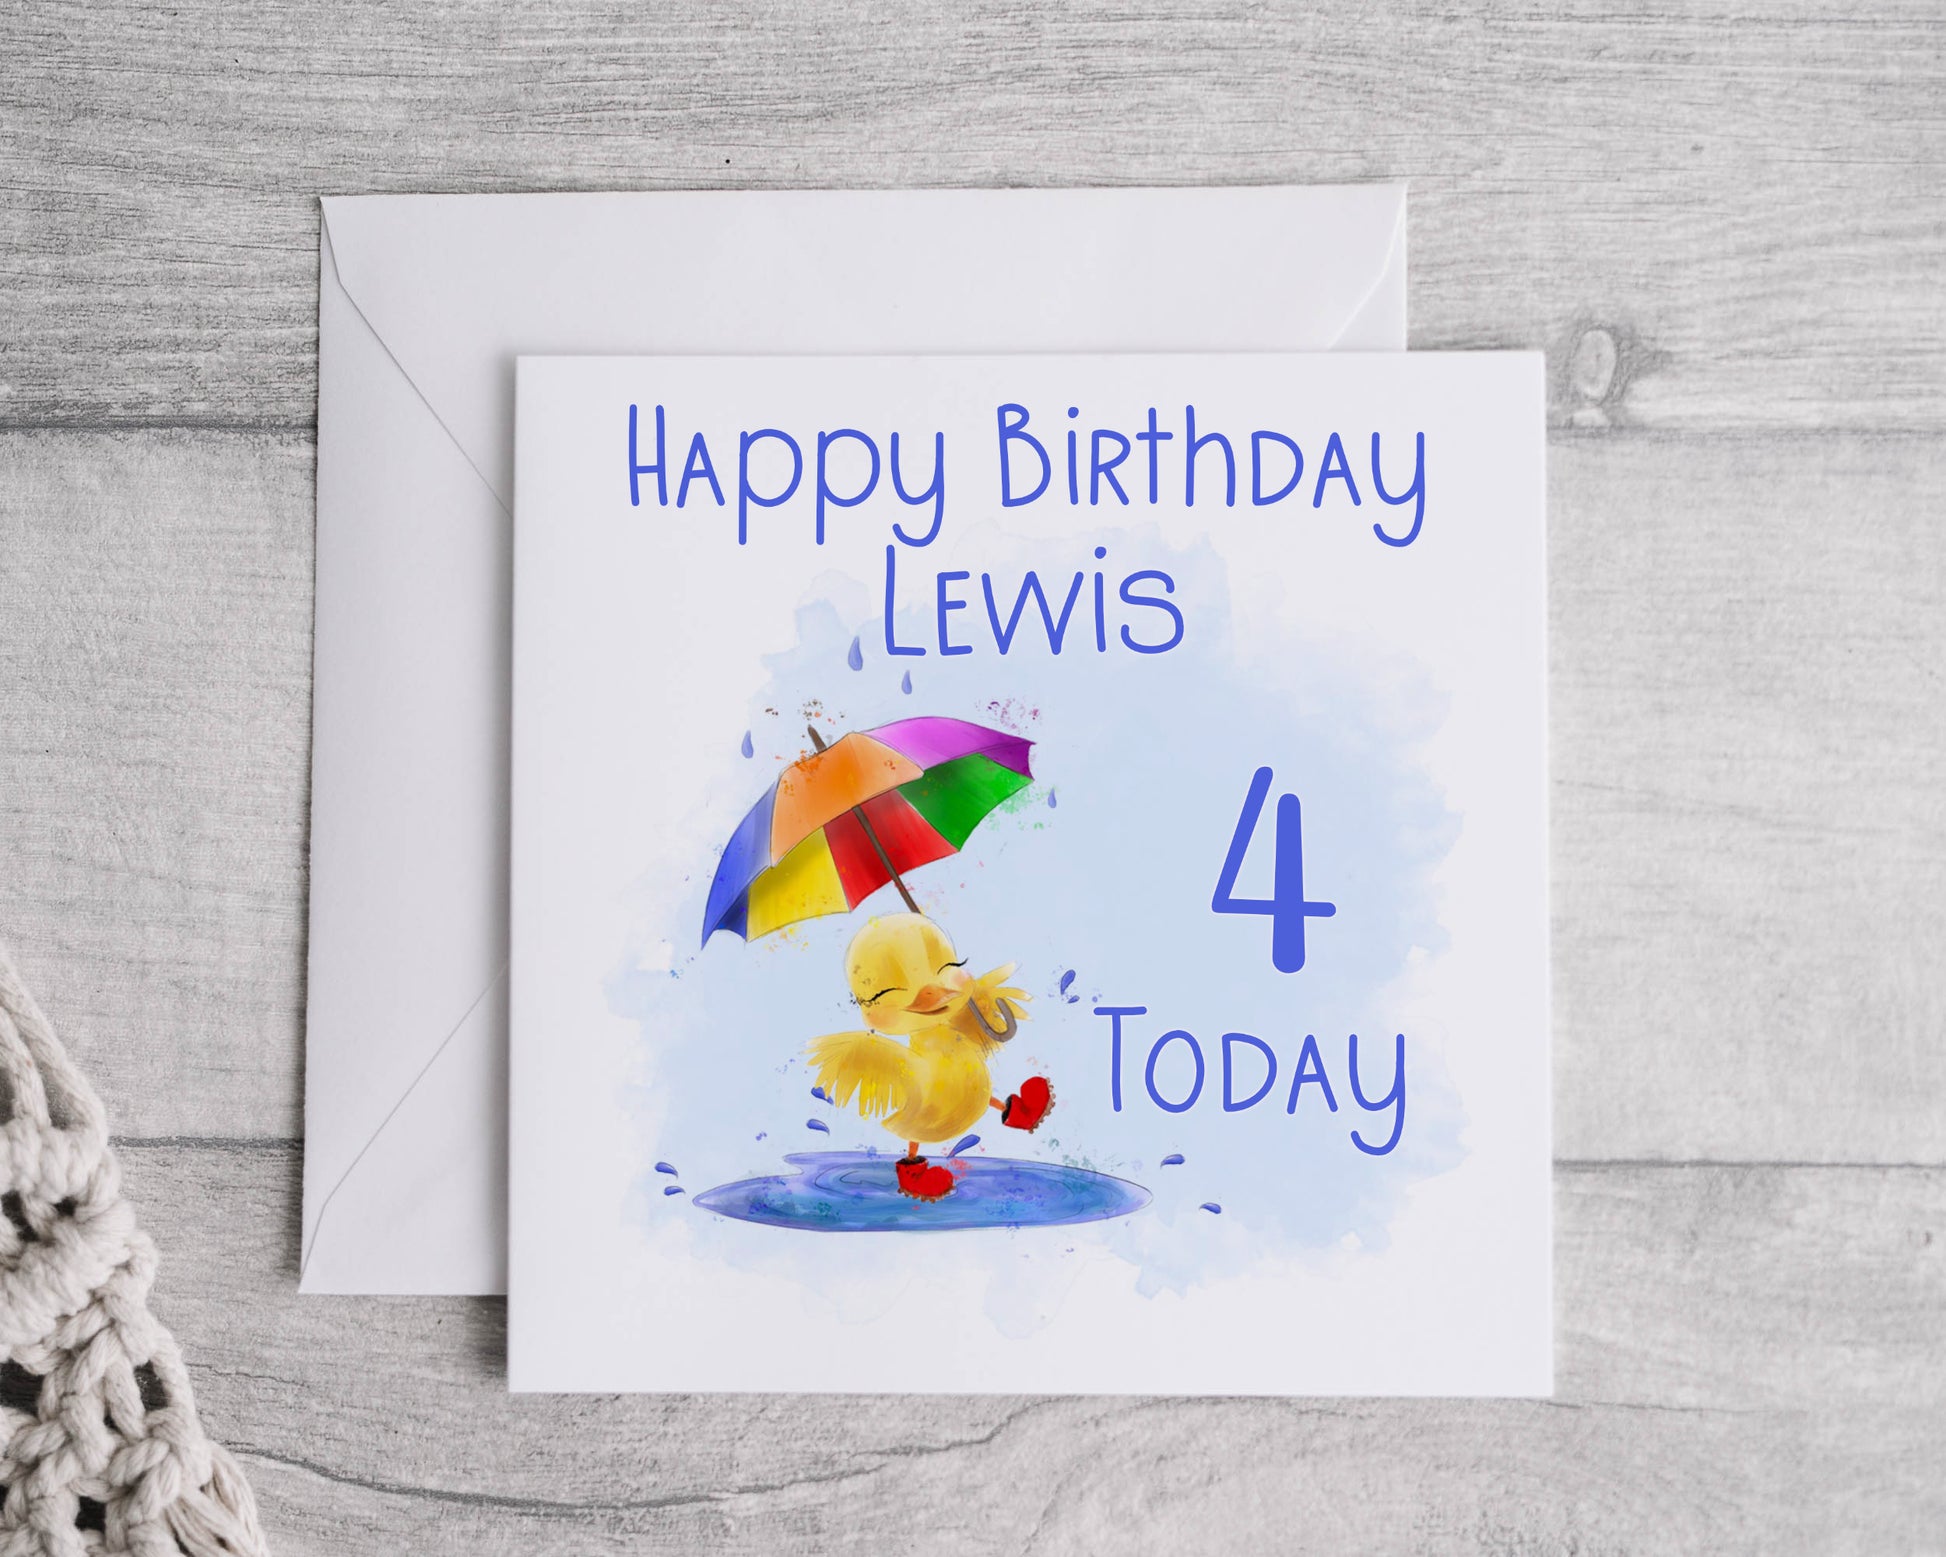 cute duck splashing in a puddle holding an umbrella, birthday age card